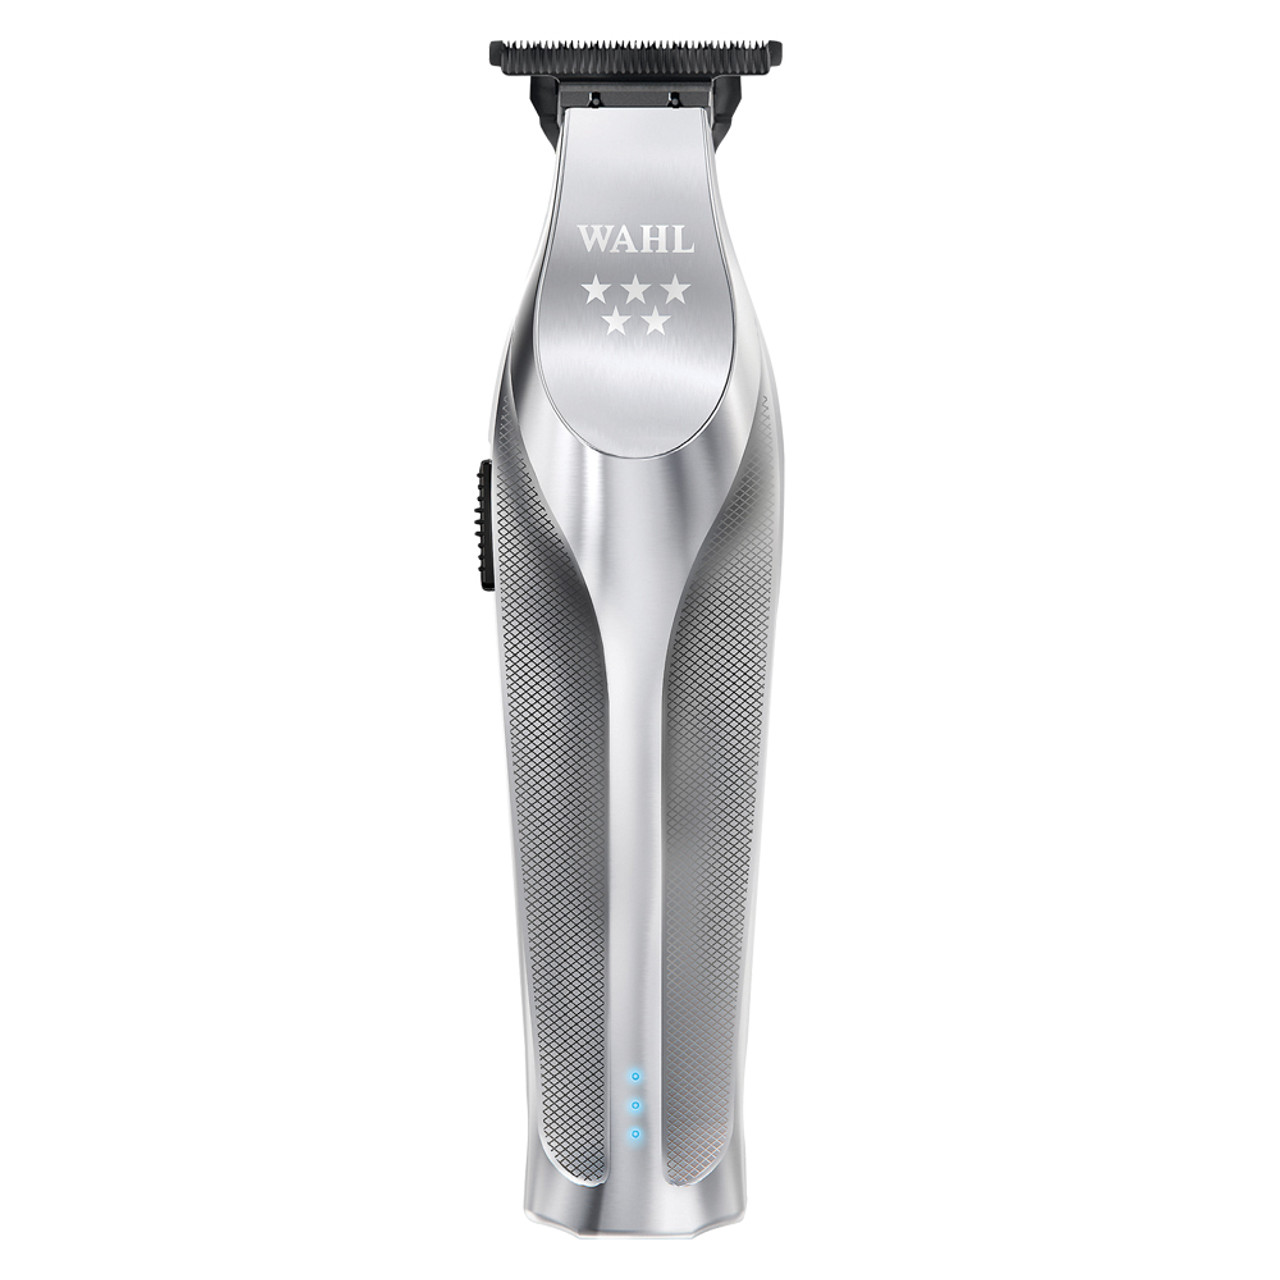 5-Star Detailer & T-Blade Trimmer by Wahl, Hair Clippers & Trimmers